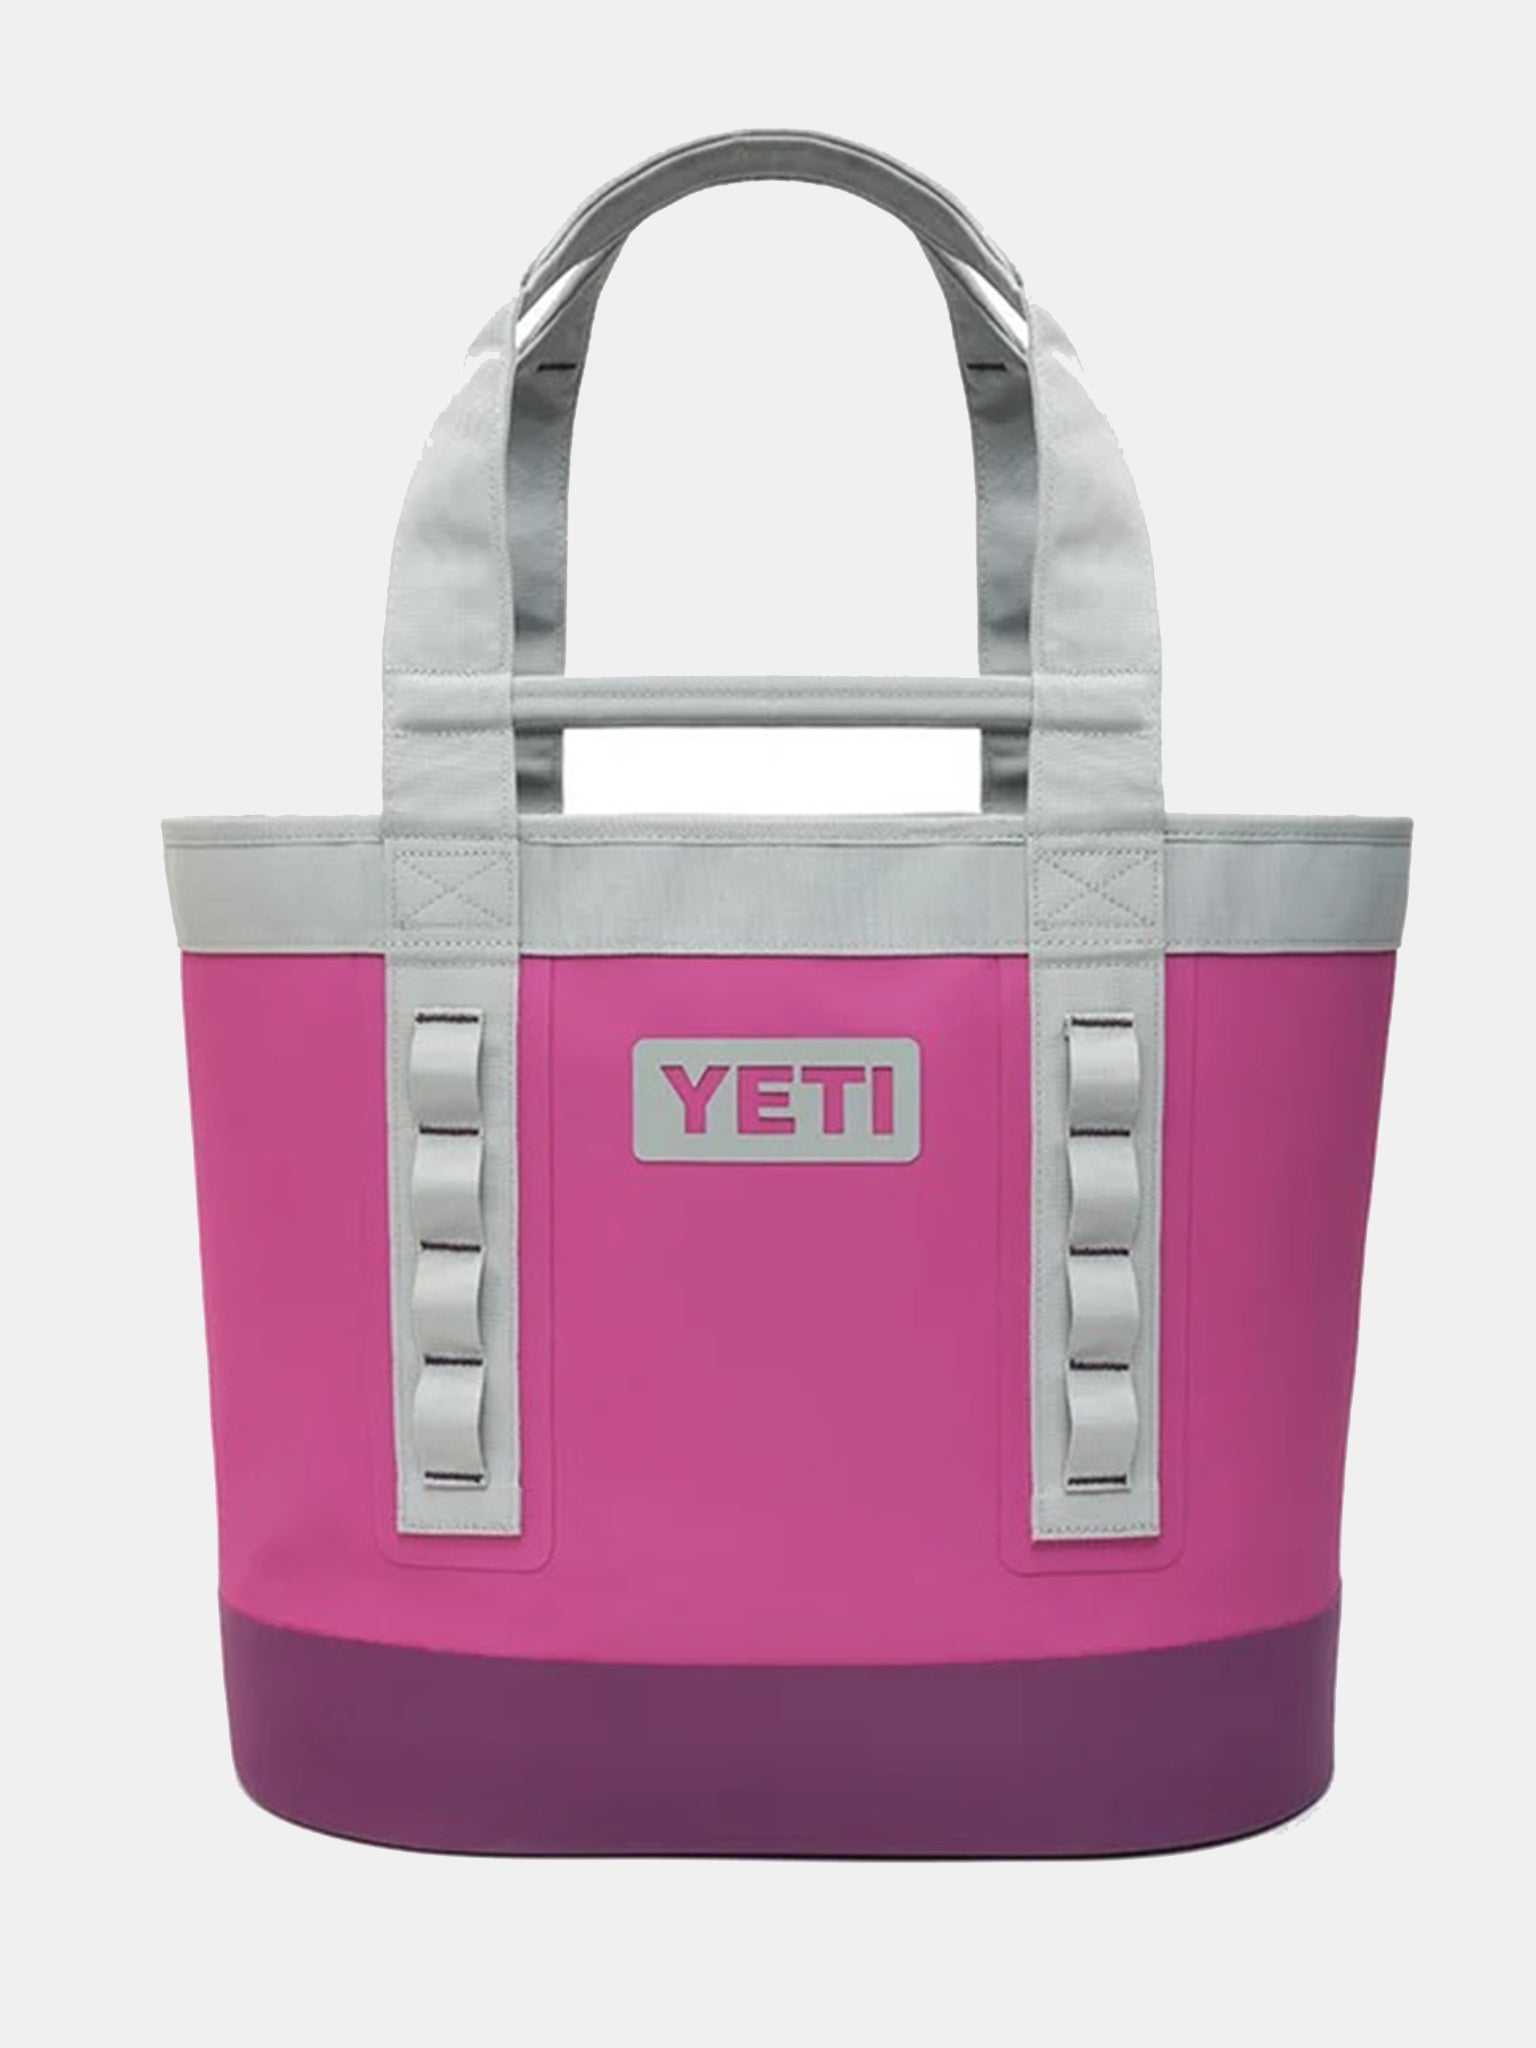 YETI CAMINO 35 CARRYALL TOTE BEACH BAG RARE DISCONTINUED CORAL COLOR NWOT  LE